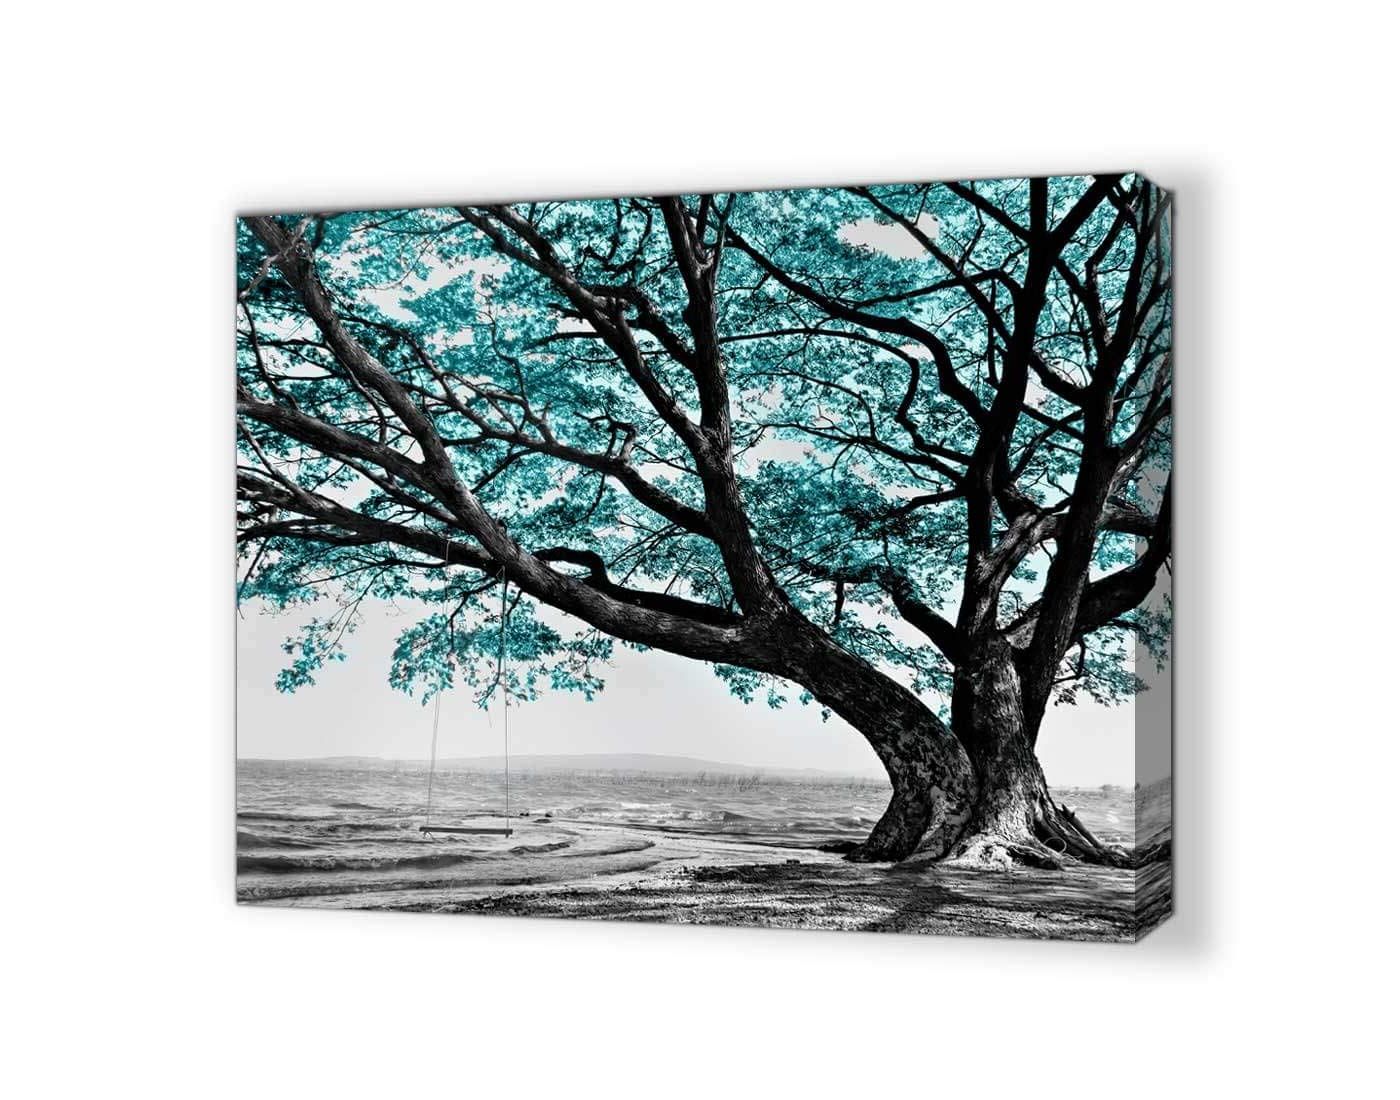 2017 Amazon: Teal Rustic Bathroom Decor For The Home Bedroom Black And White  Tree Pictures Country Kitchen Wall Decor Modern Wall Decor Canvas Framed  Wall Art Landscape Artwork For Walls Wall Decoration Size Regarding Dark Teal Wood Wall Art (View 14 of 15)